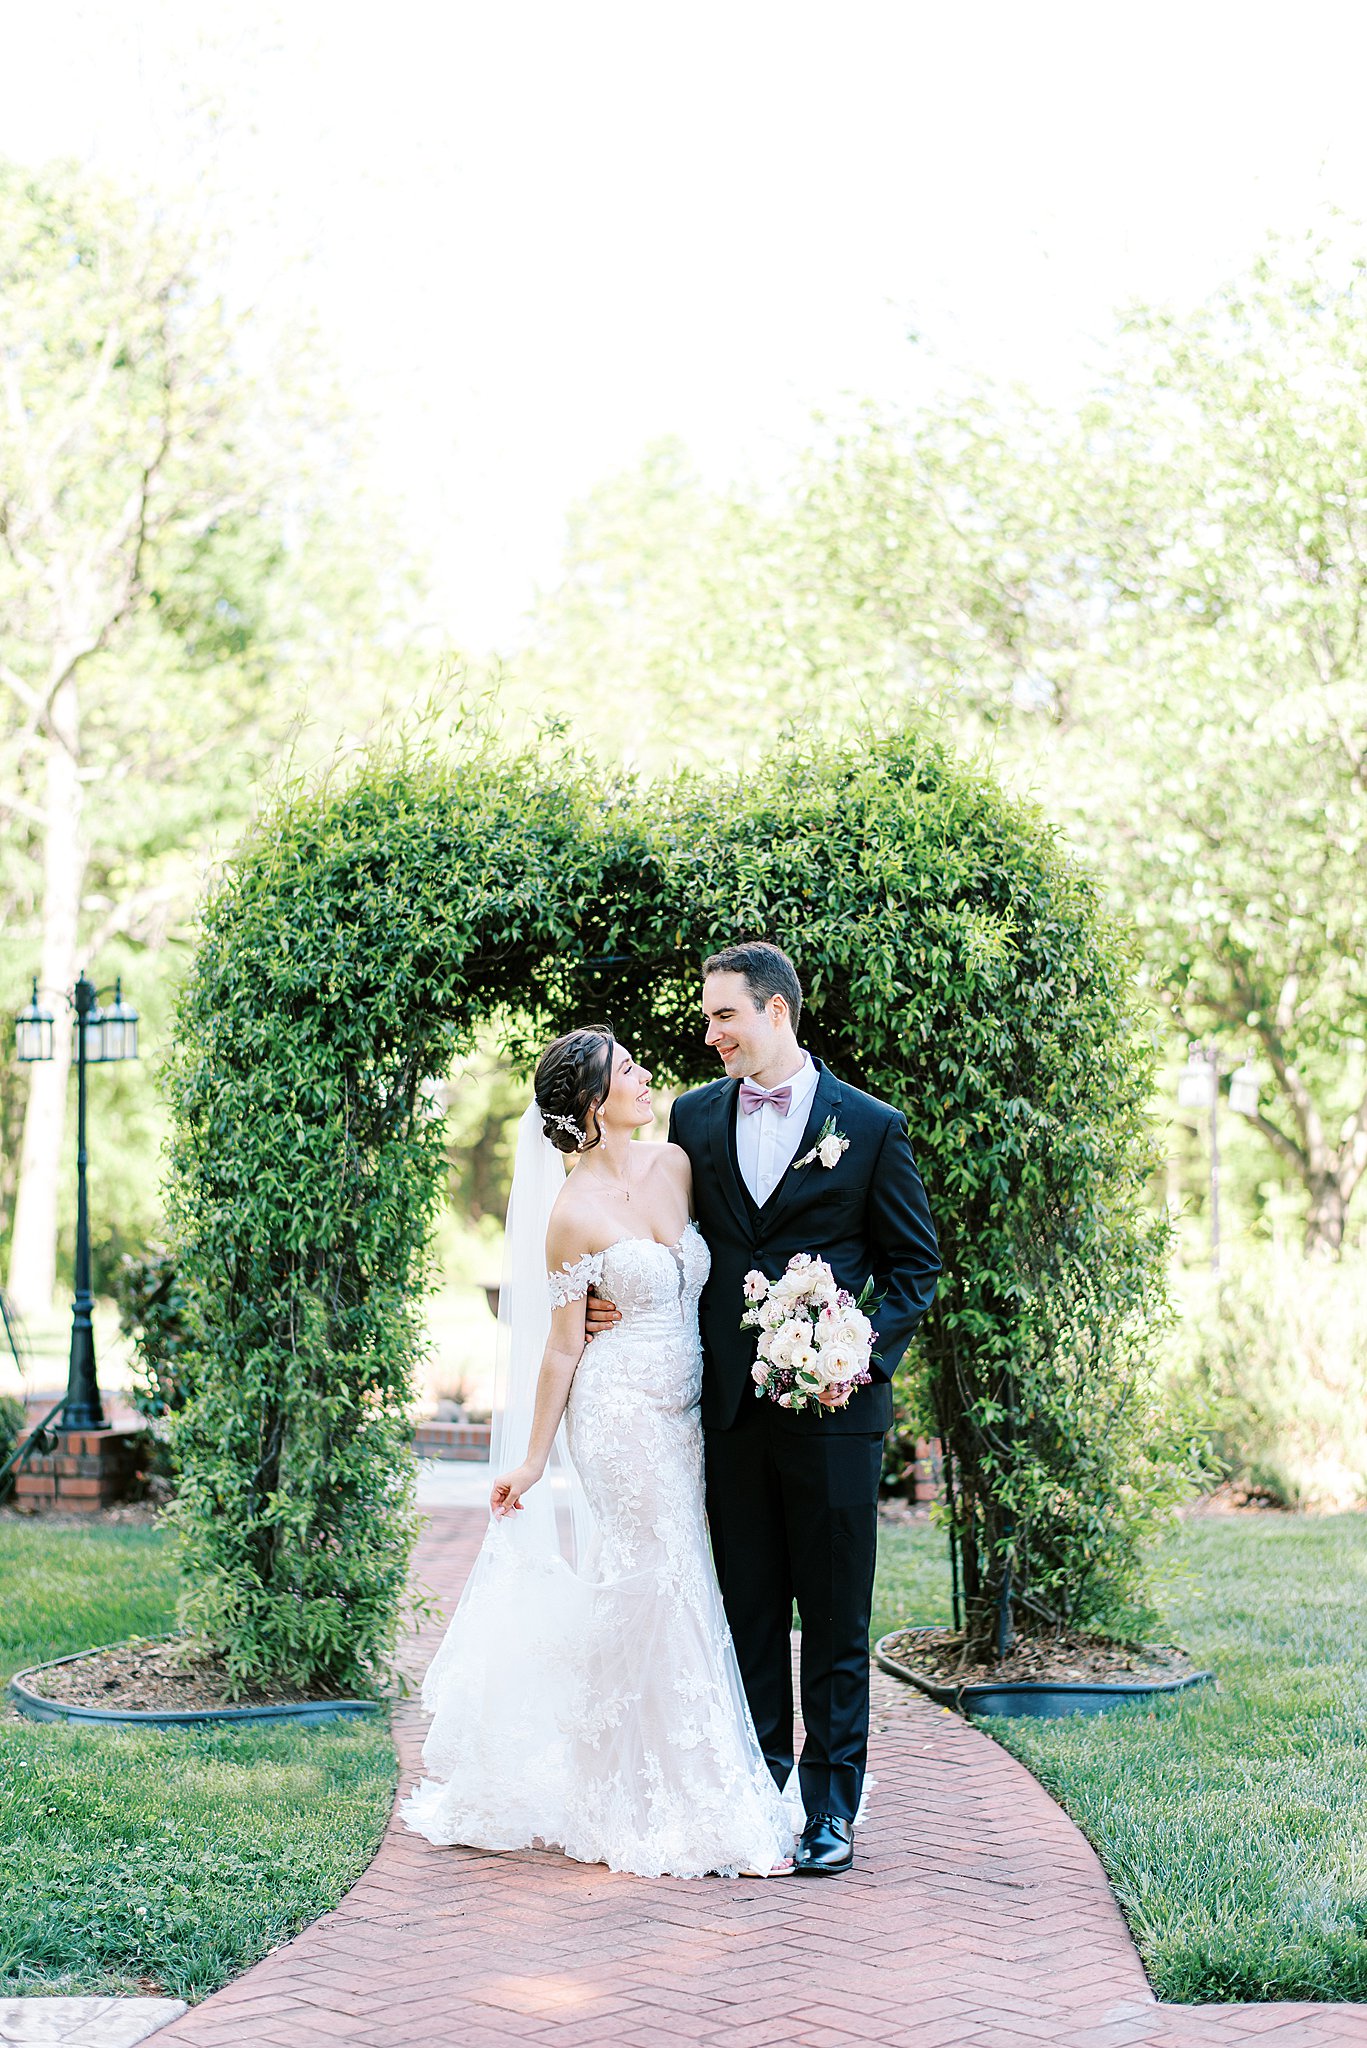 Newlyweds walk through a garden arch in a lace dress and black suit Brawley Estate